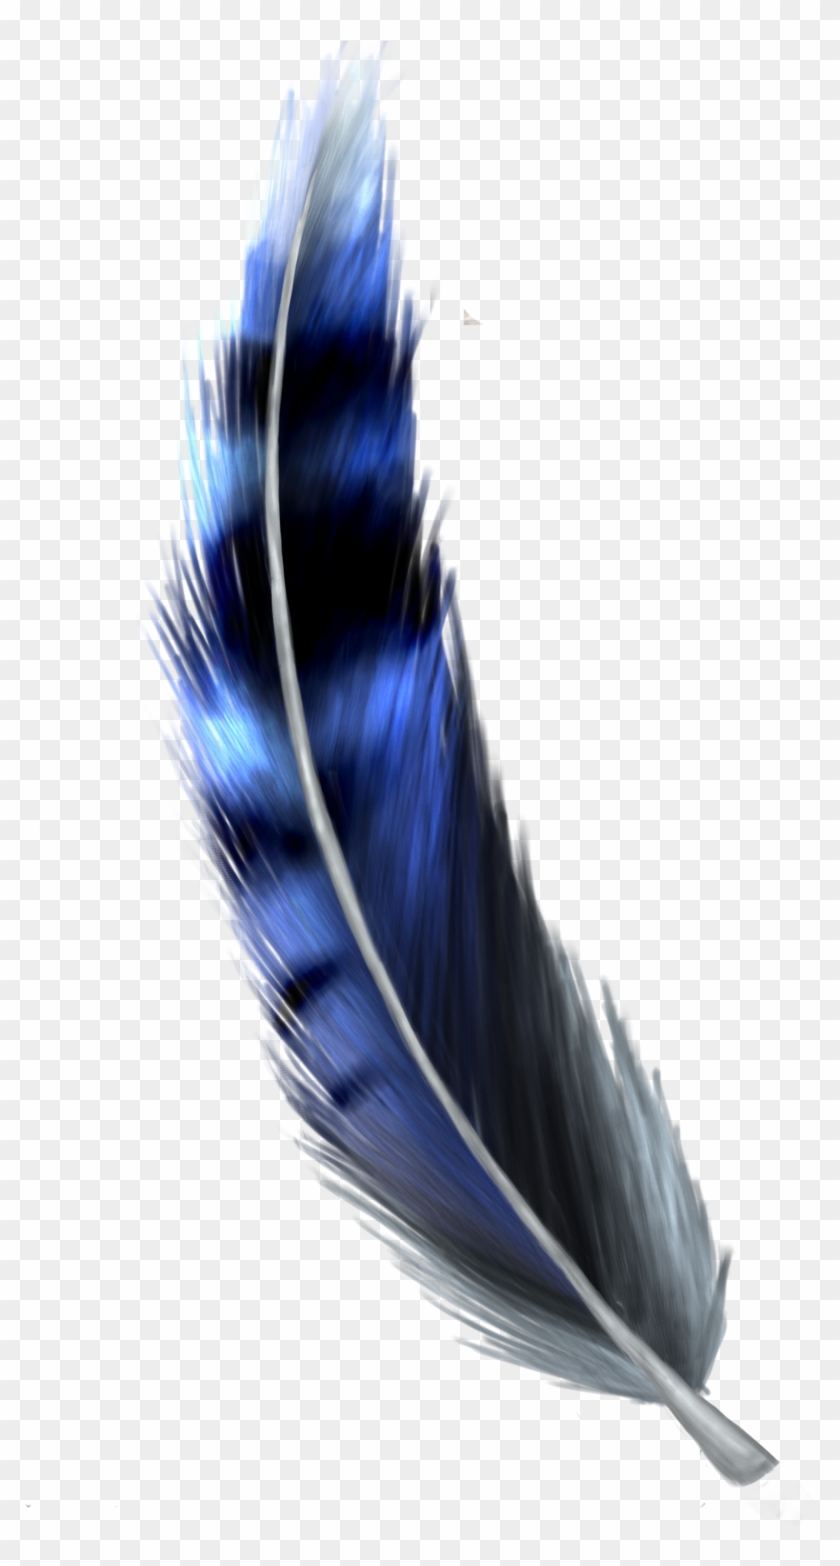 Jay Feather Png Transparent Blue Jay Feather Png Download 794x1486 Pngfind